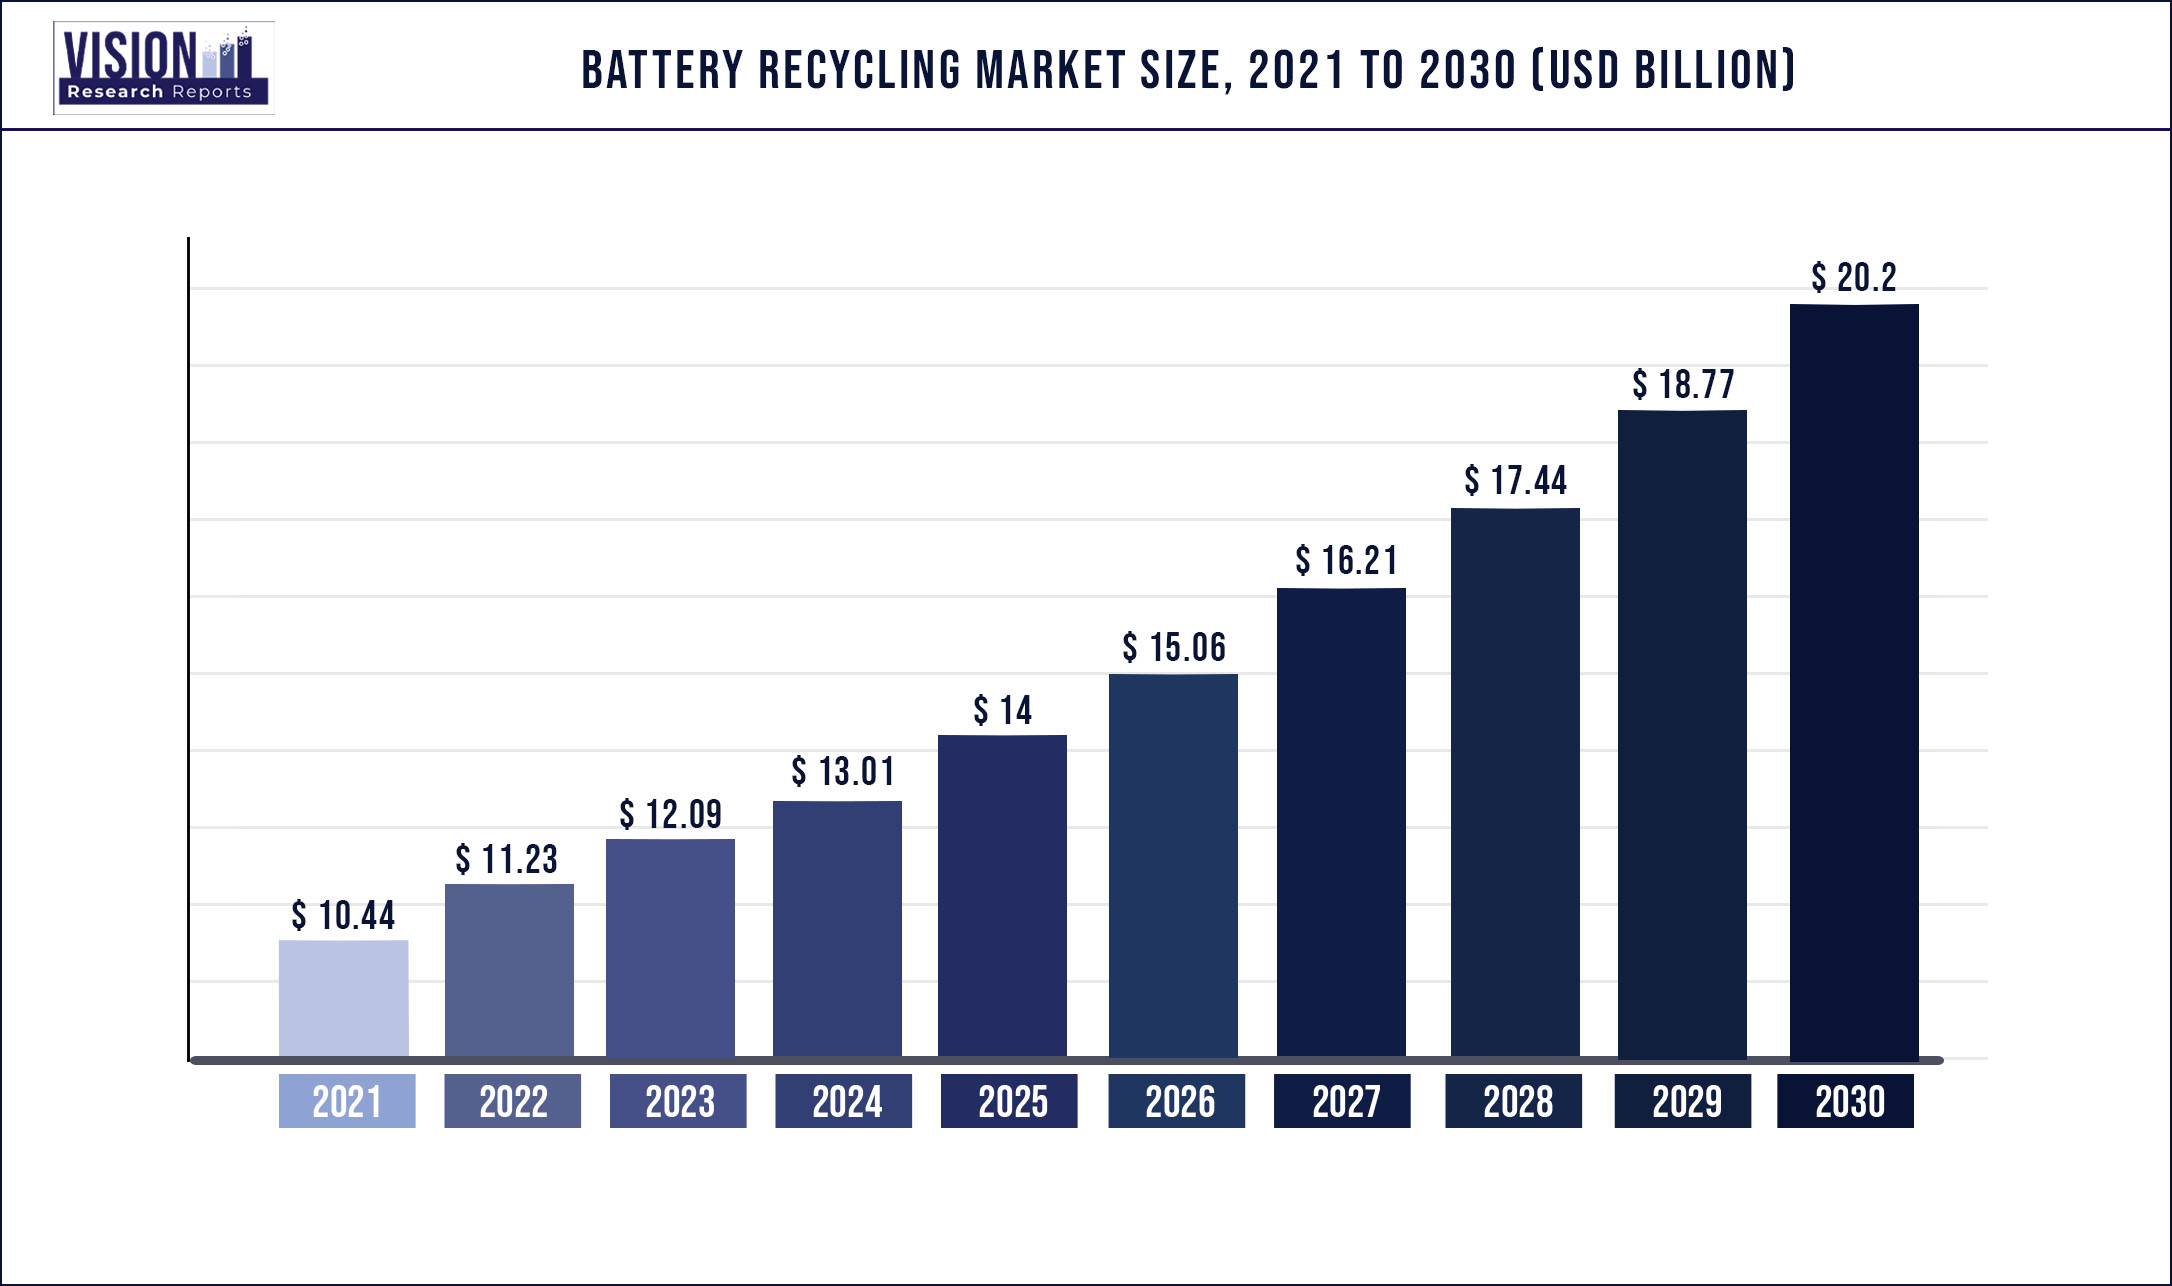 Battery Recycling Market Size 2021 to 2030